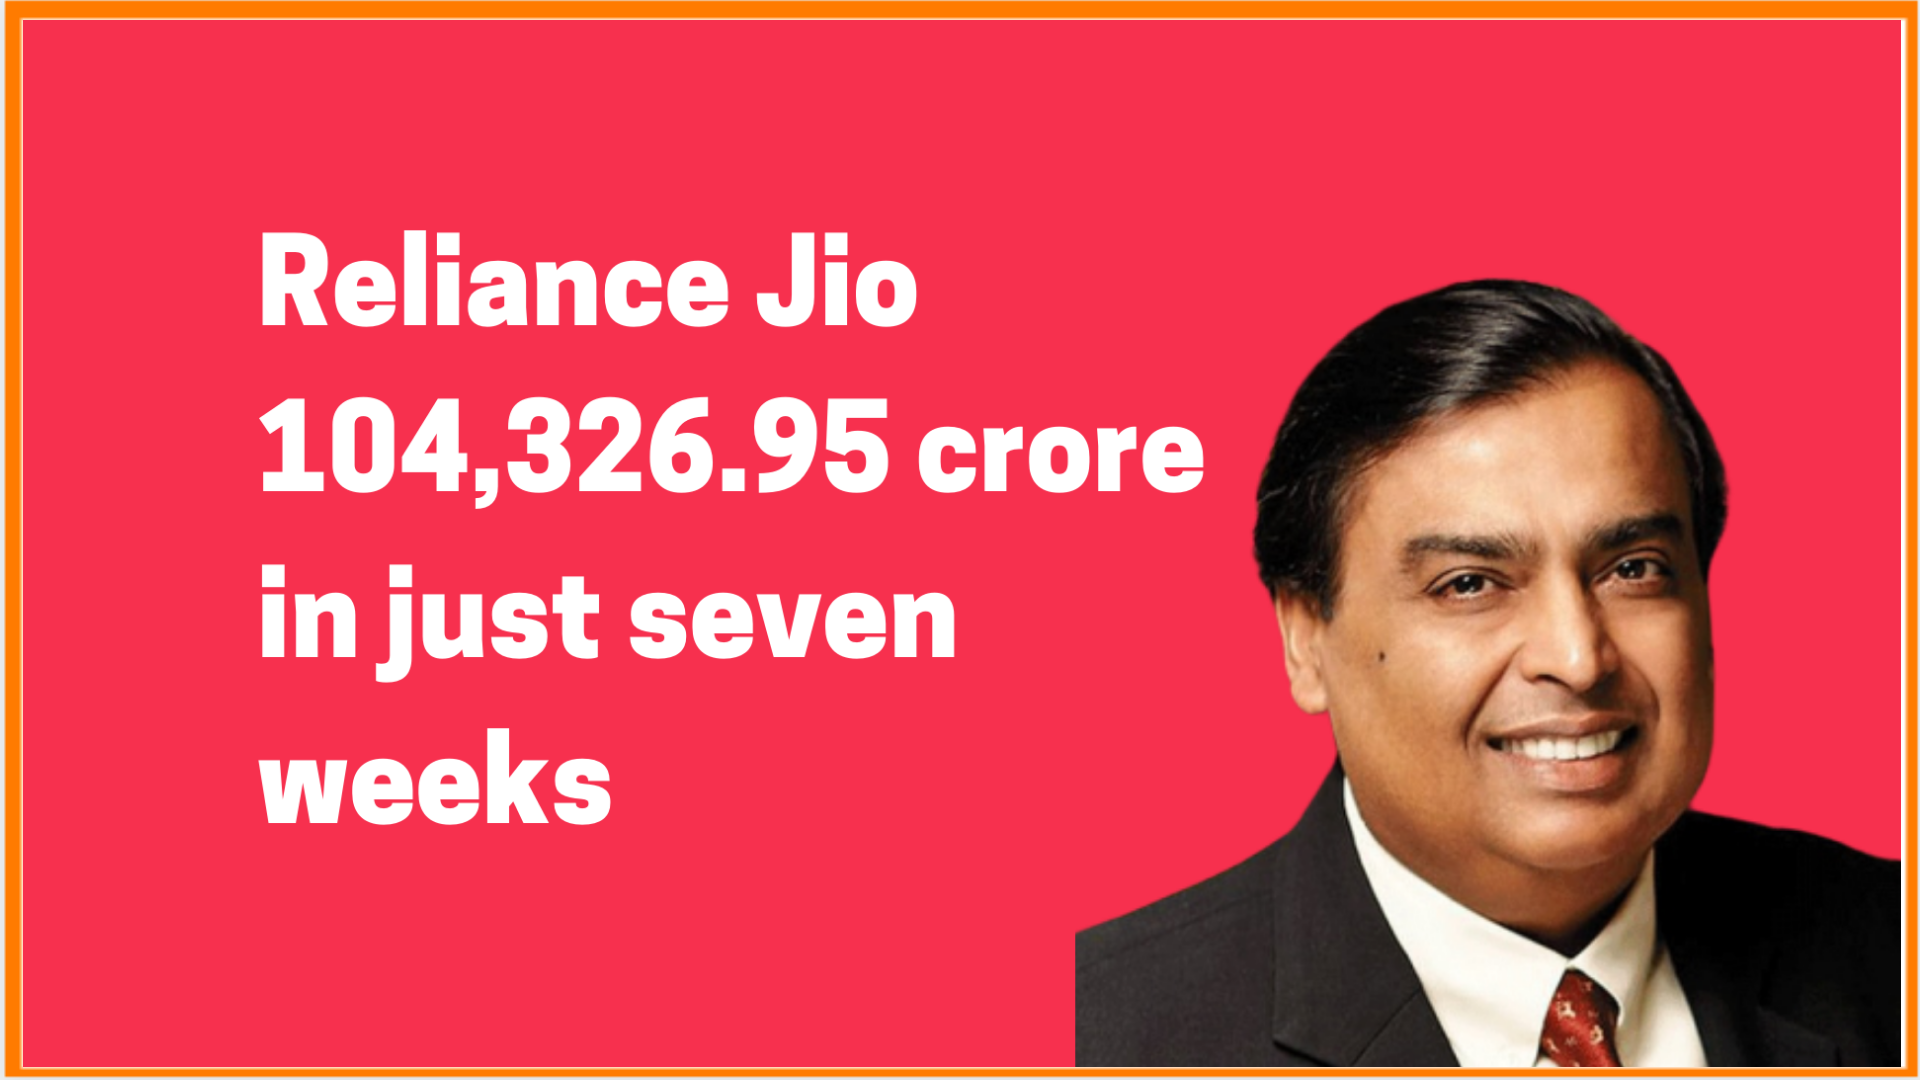 reliance-jio-and-its-investors-everything-you-need-to-know-about-it